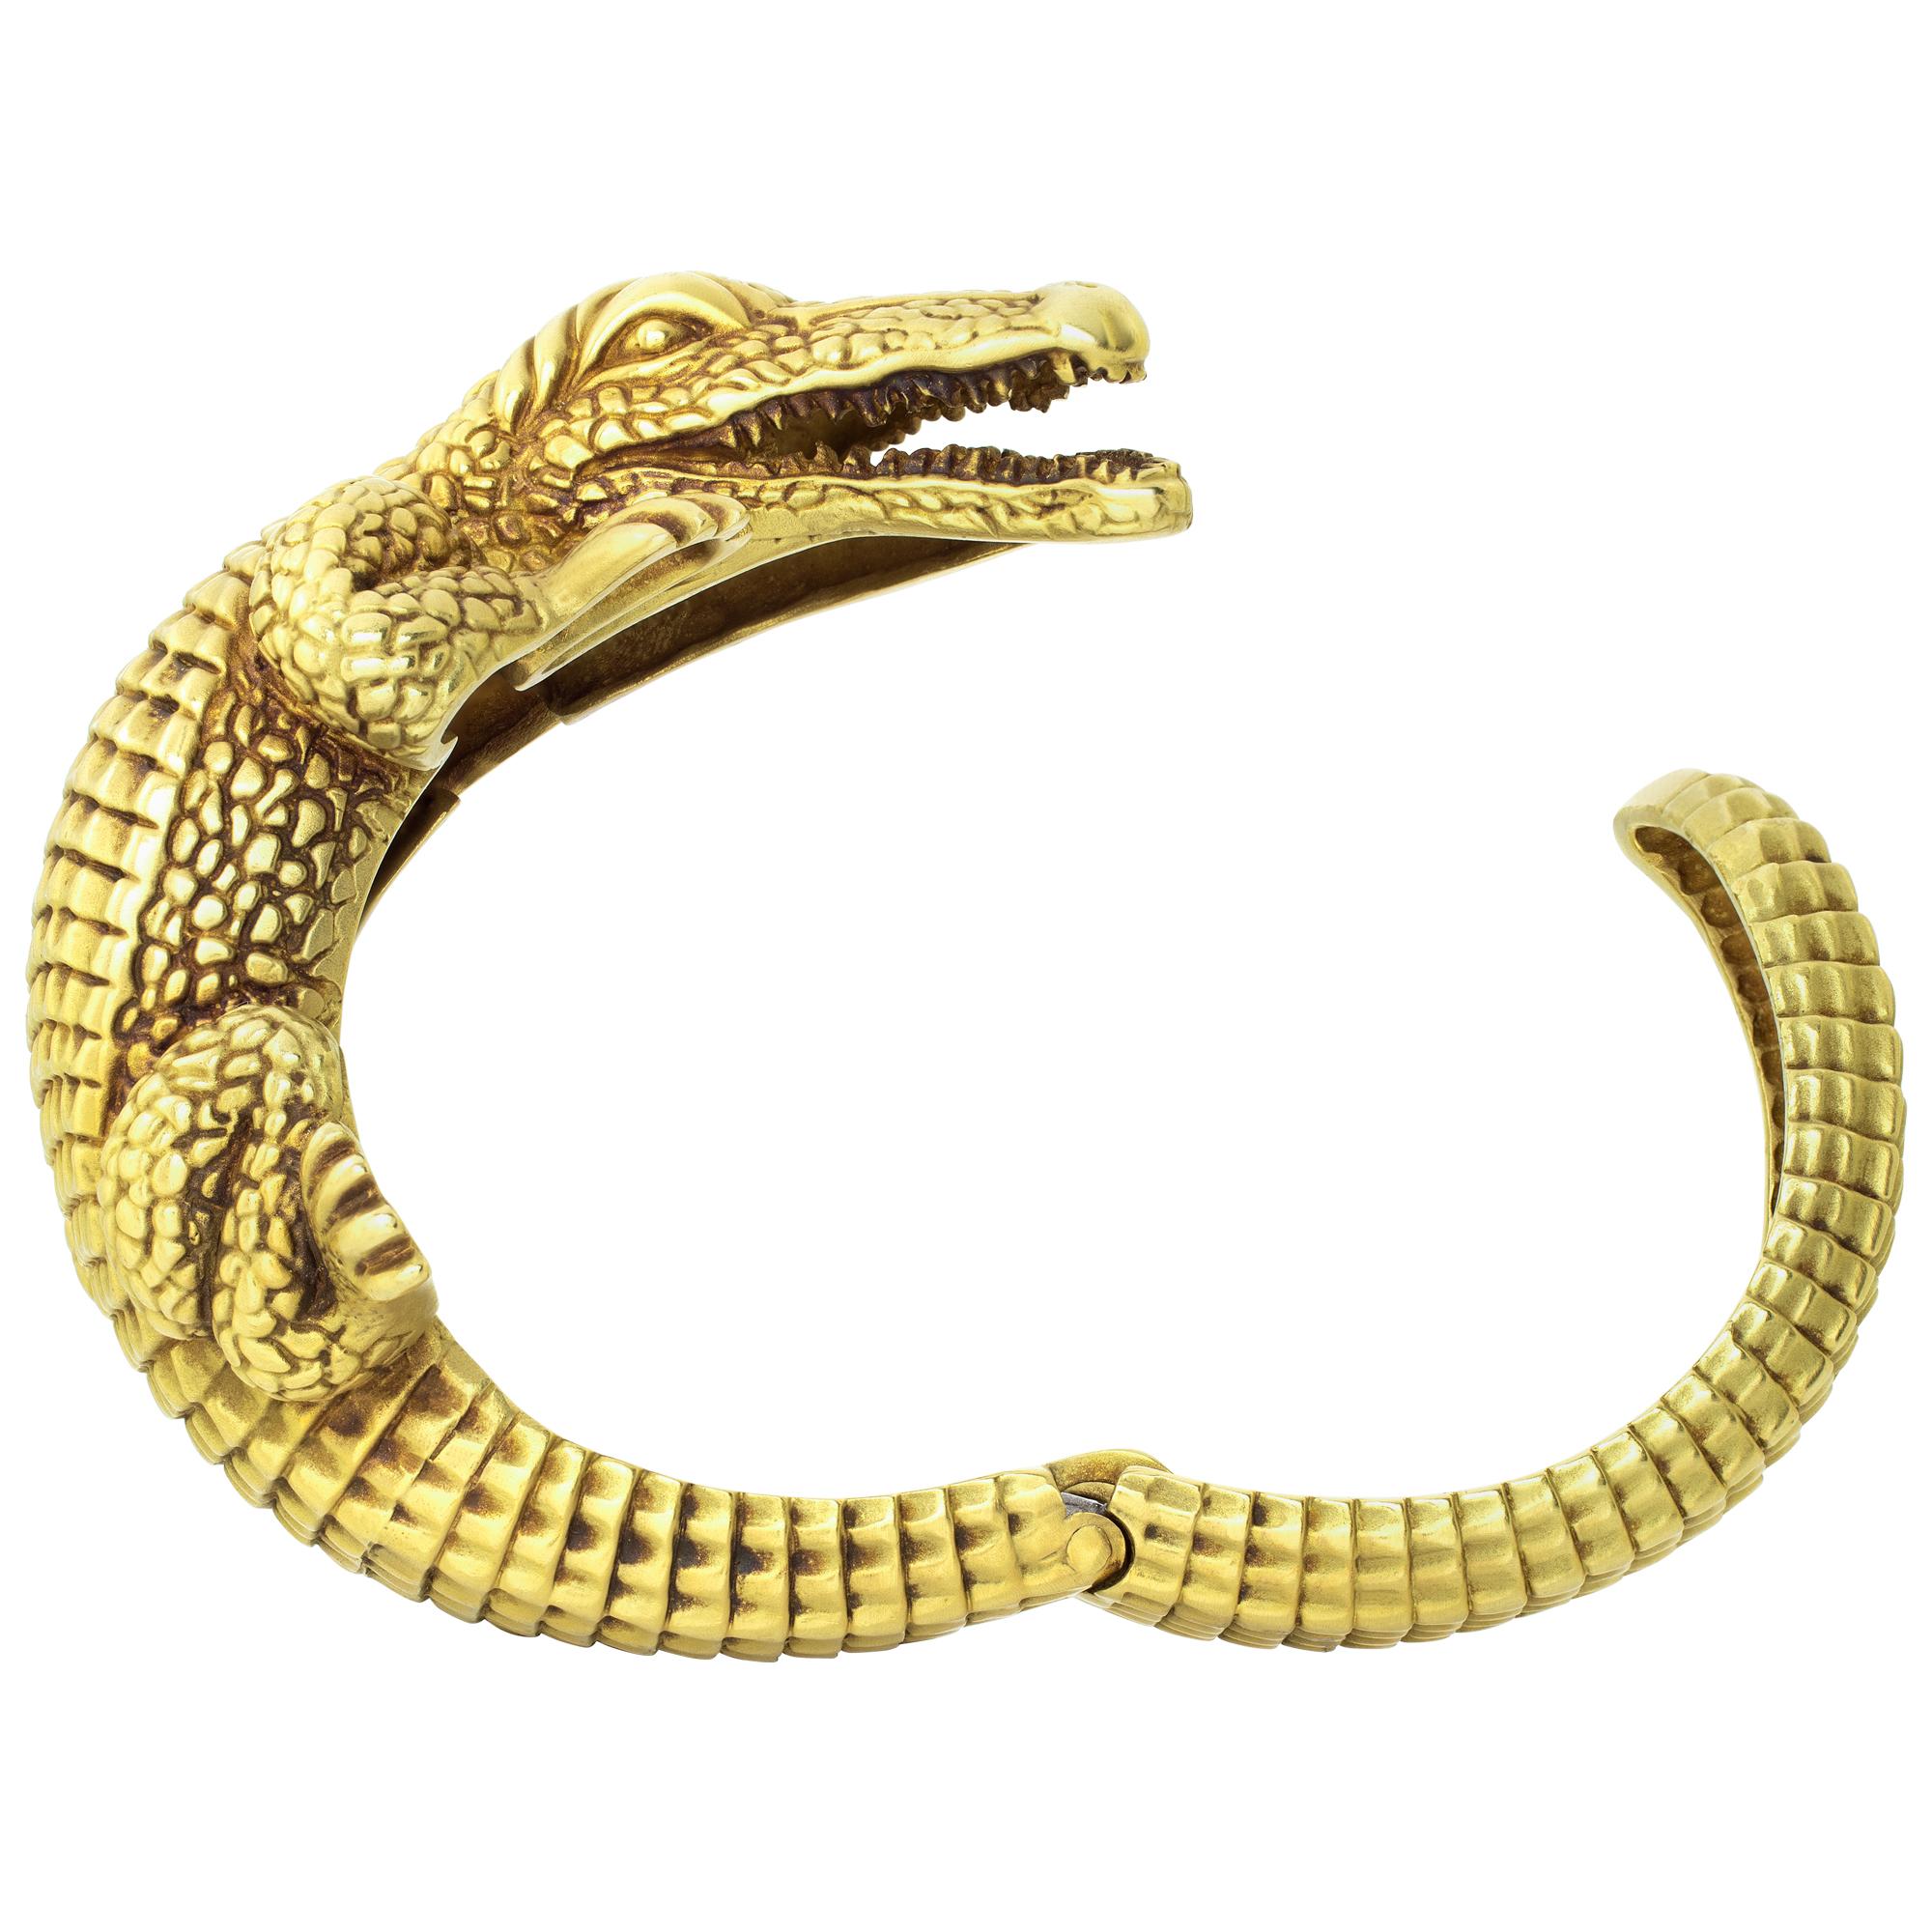 Retail $38,000 Barry Kieselstein Cord Alligator Cuff Bracelet in 18k yellow gold. The iconic alligator by Kieselstein-Cord is a look that will never go out of fashion. This utterly fierce Cuff Bracelet is crafted in matte yellow gold as an